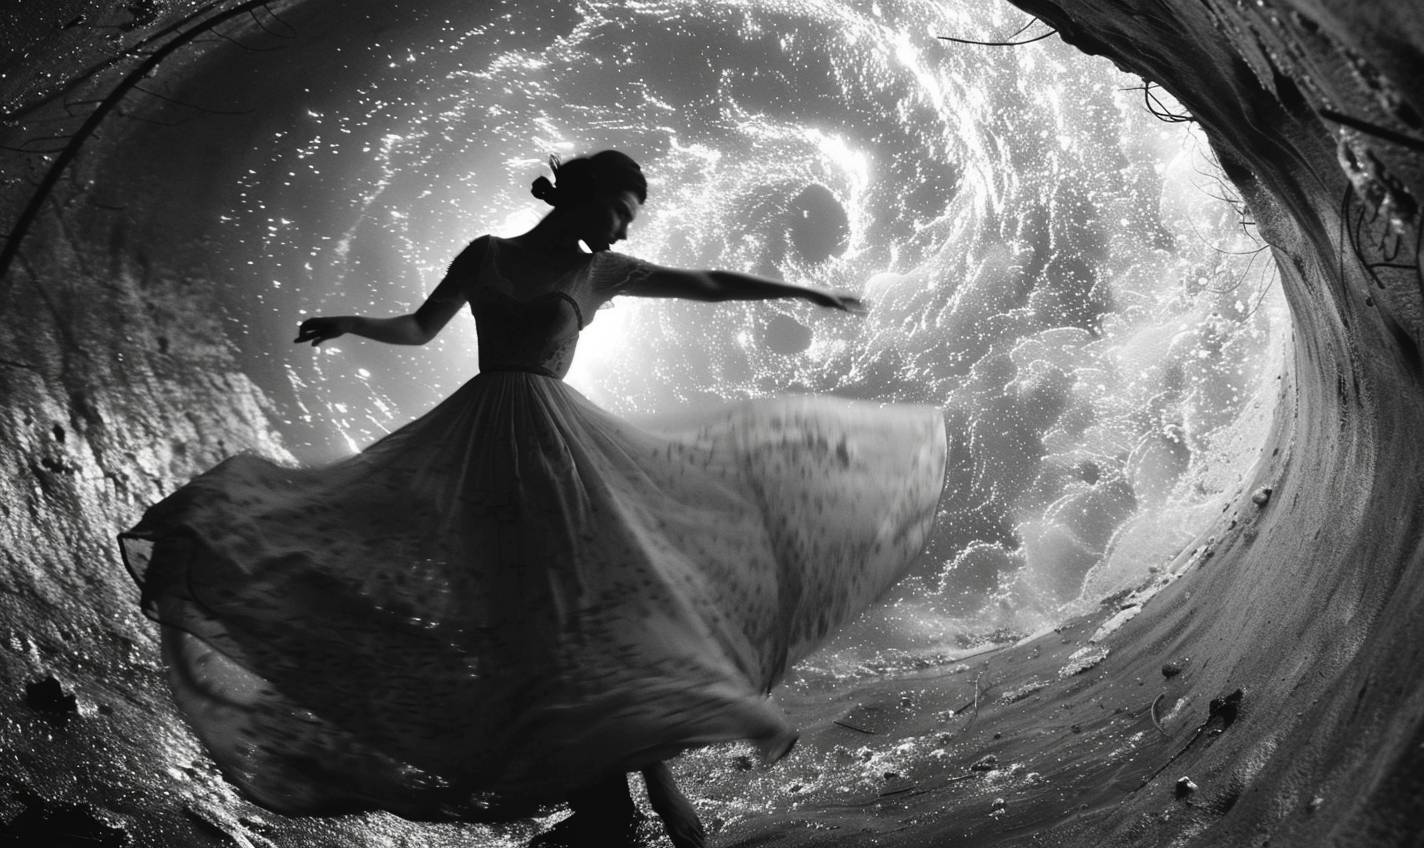 In the style of Lillian Bassman, cosmic journey through wormholes